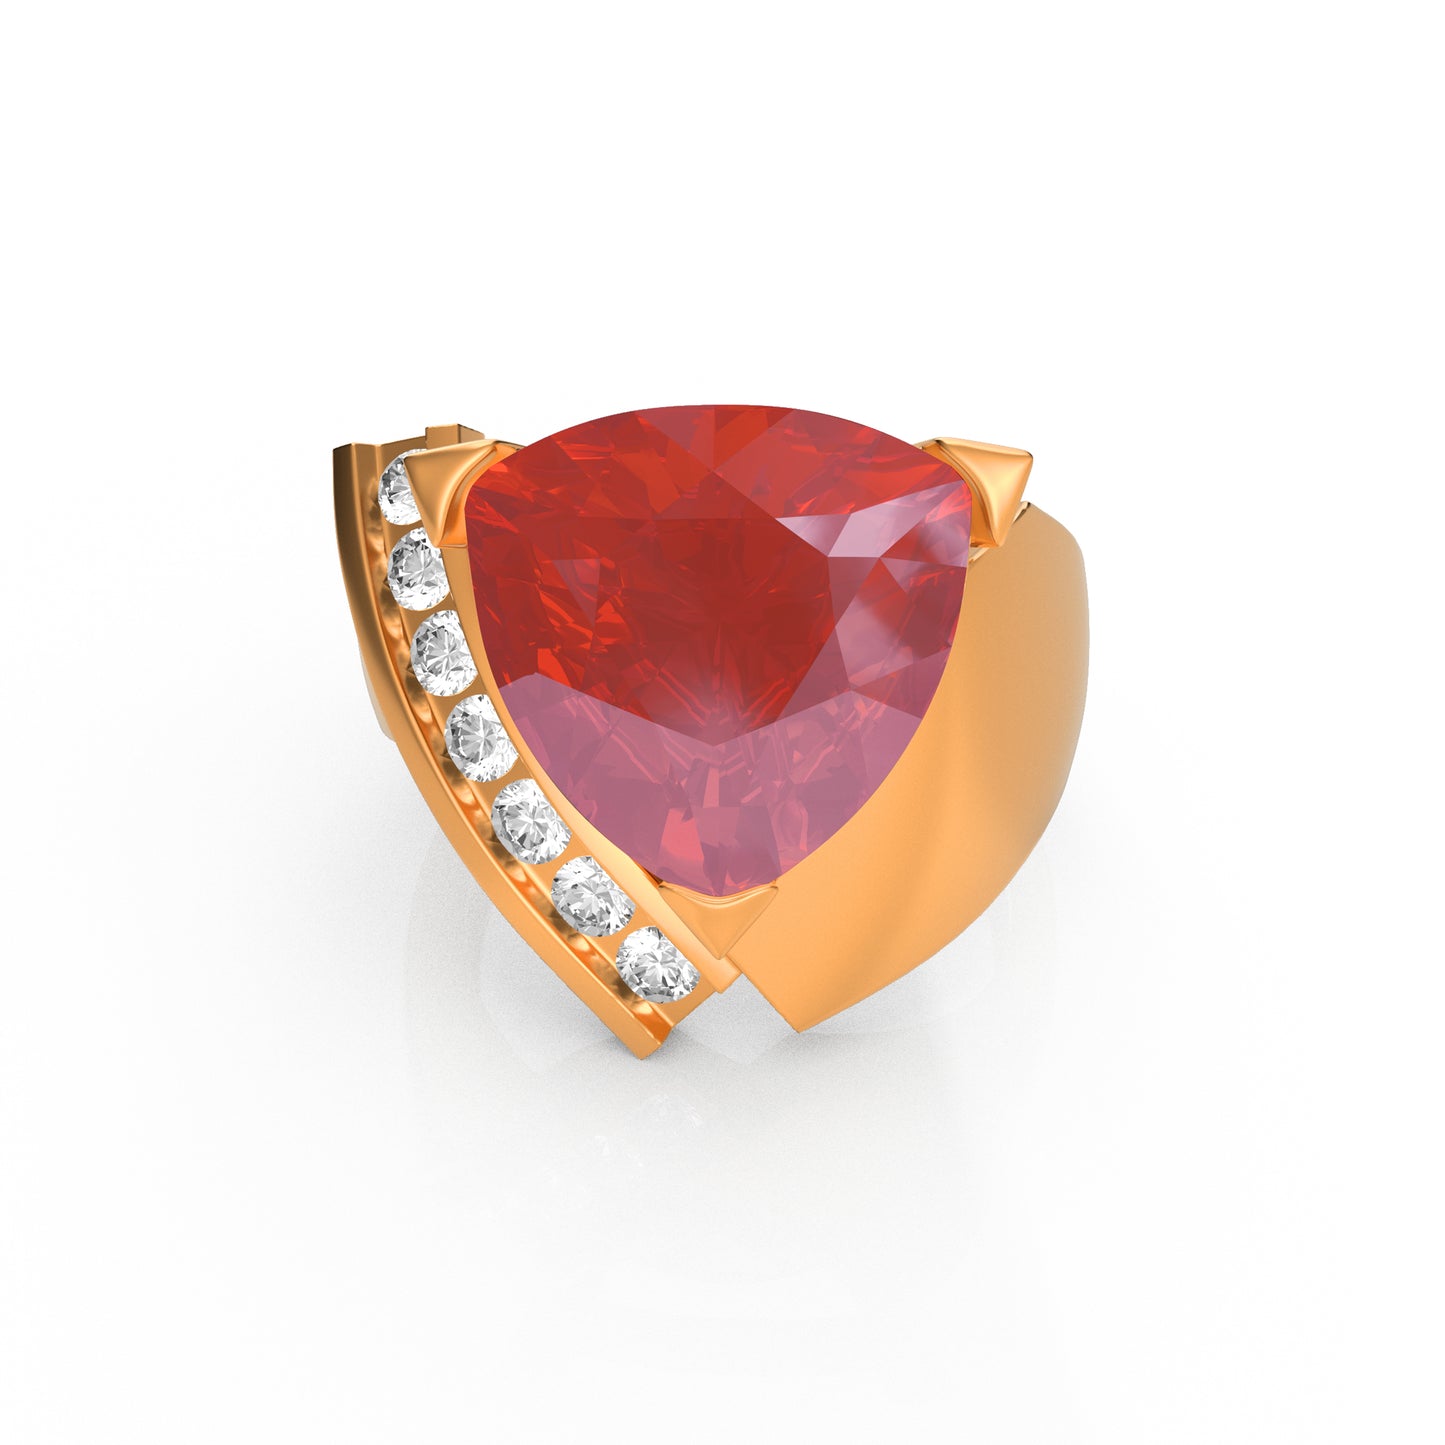 "Fire" Ring with 6.03ct Dominicanique